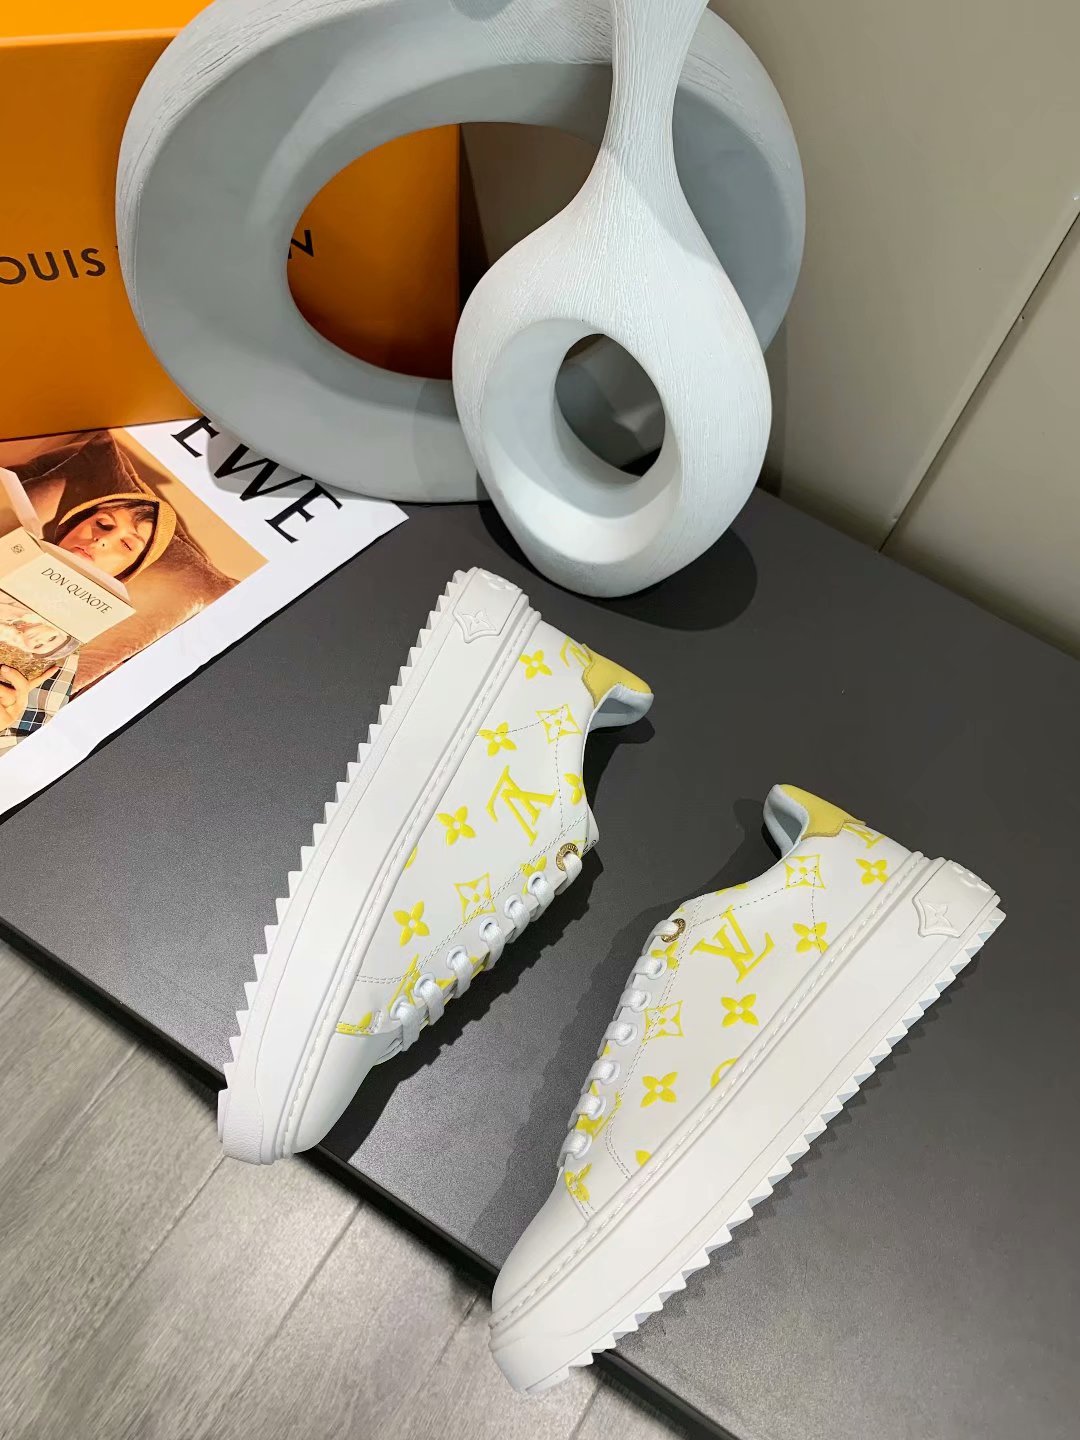 PT - LUV Time Out Yellow Sneaker